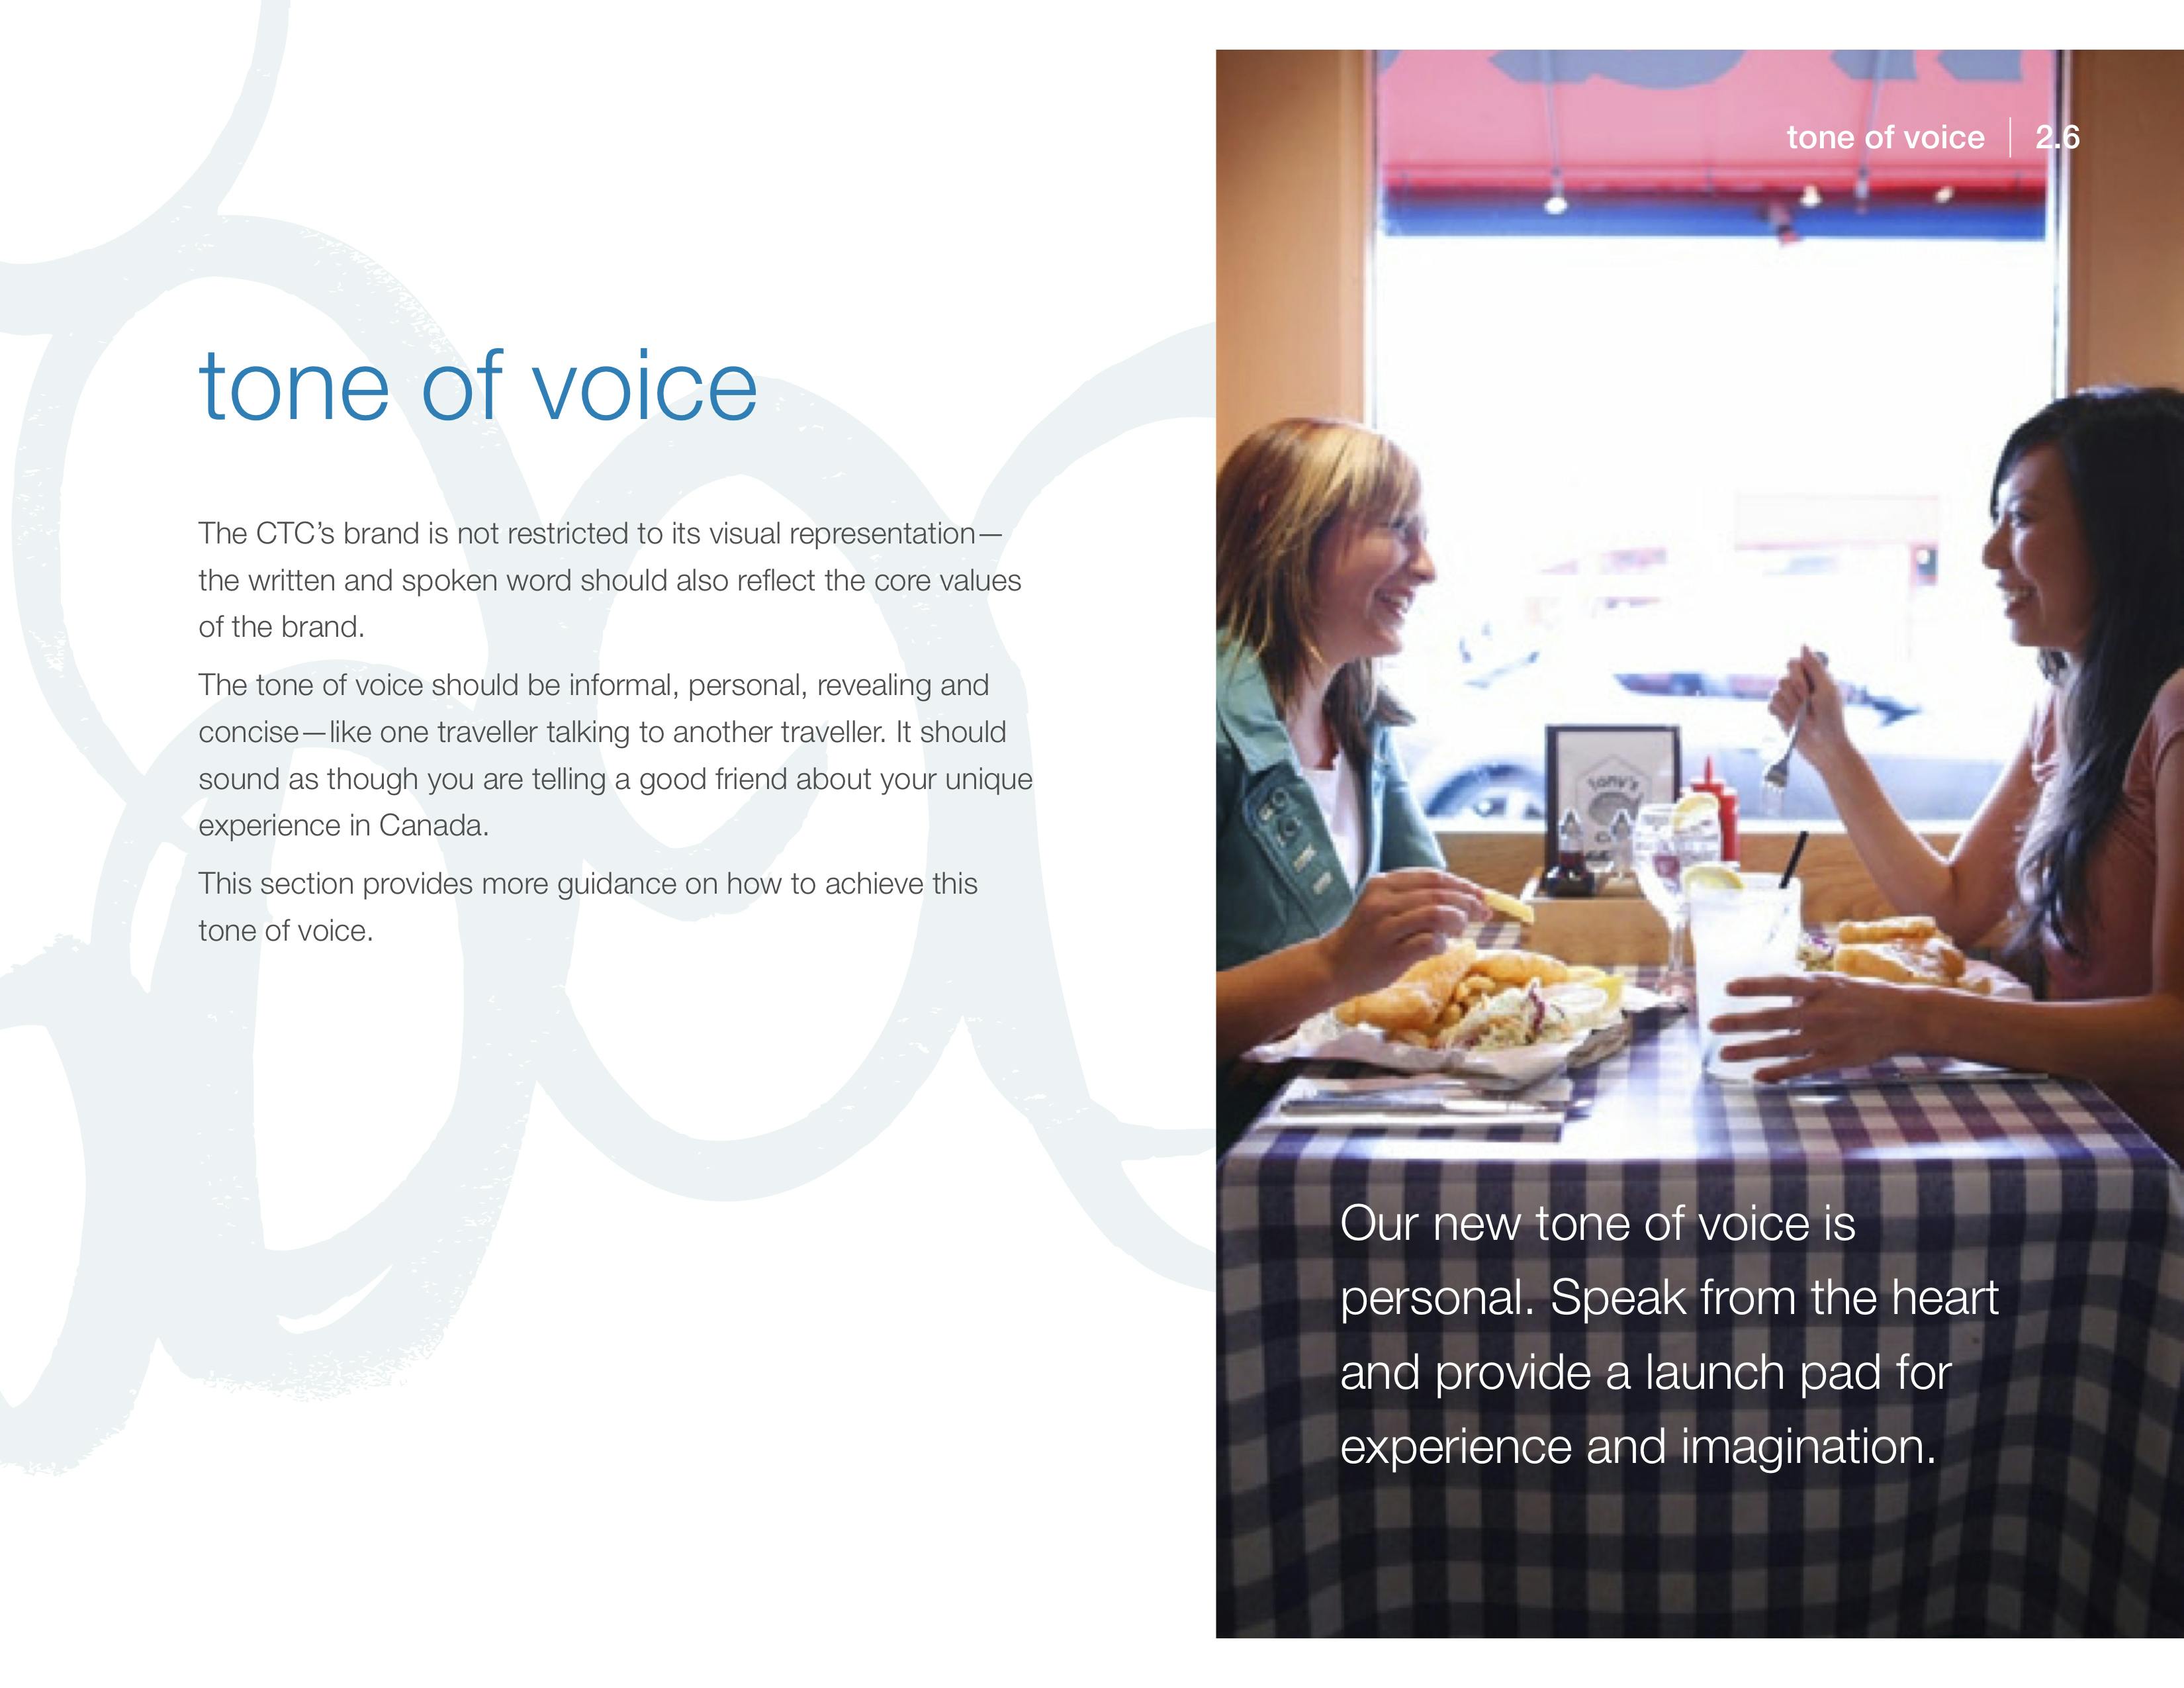 Ad for Tone of Voice